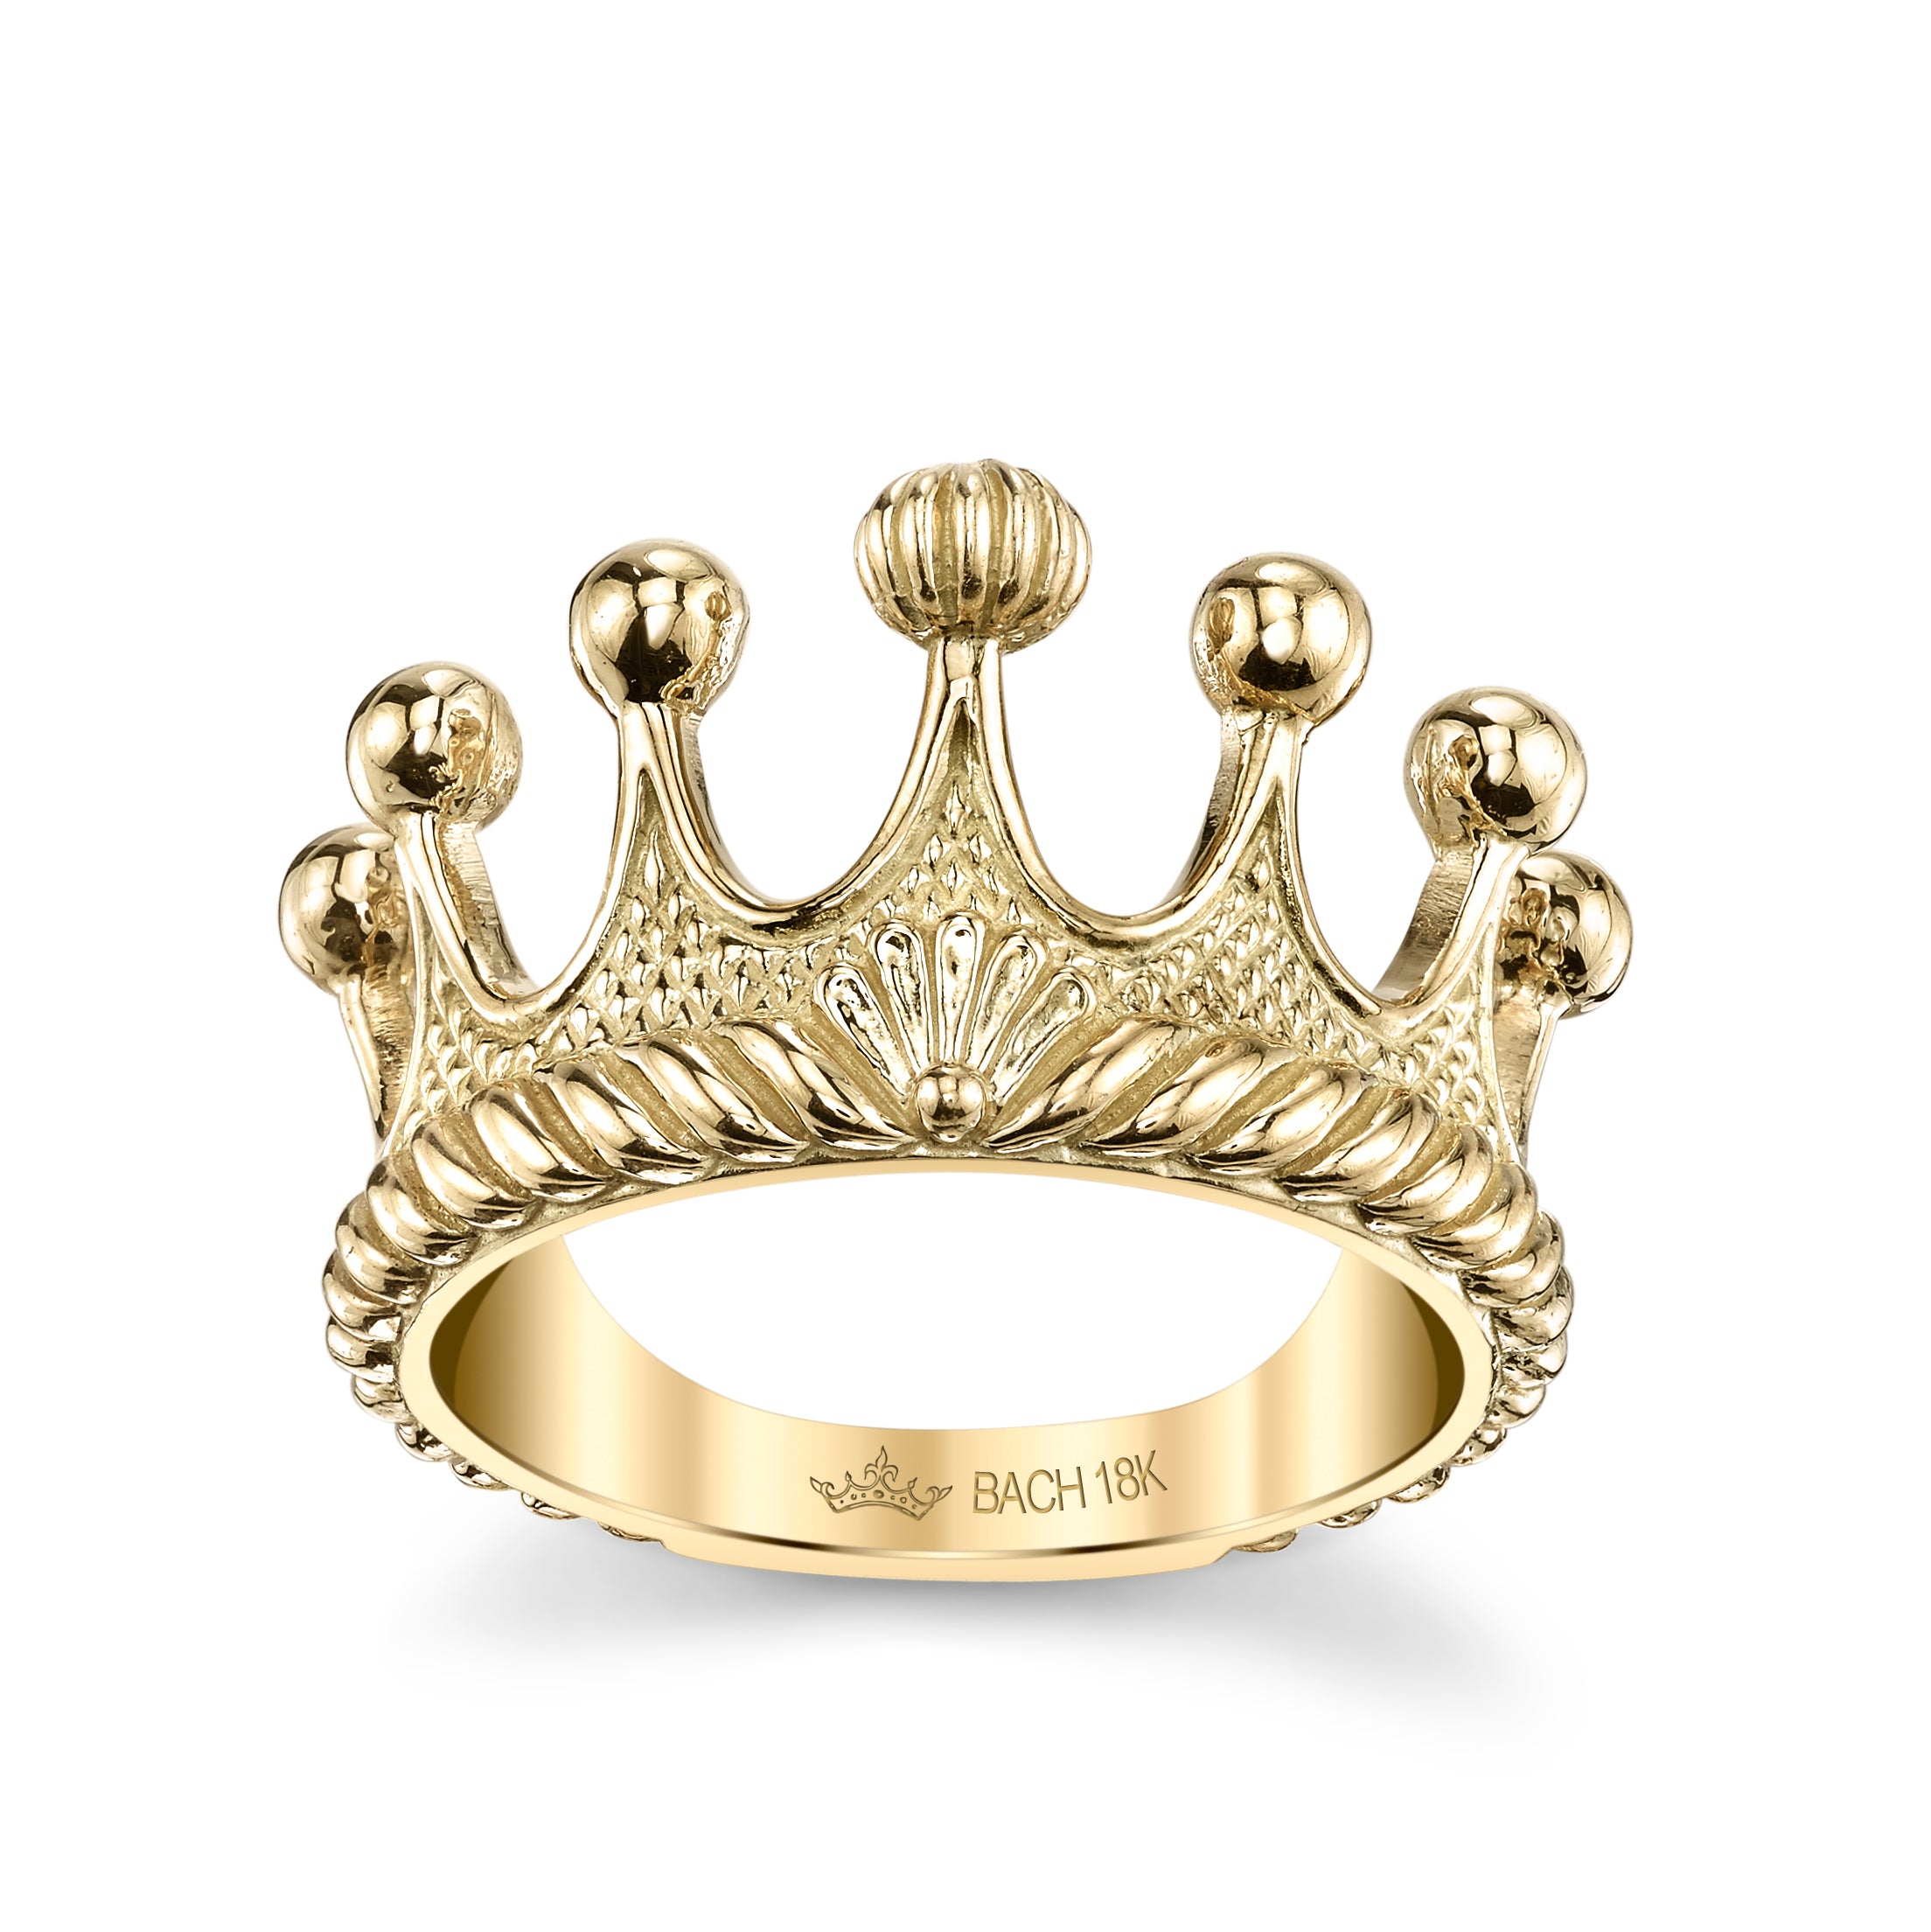 Buy 14K Gold Crown Ring, Dainty Gold Princess Crown Ring, Gold Princess Ring,  Gold Tiara Ring, Gold Queen Ring, Birthday Gift for Her Online in India -  Etsy